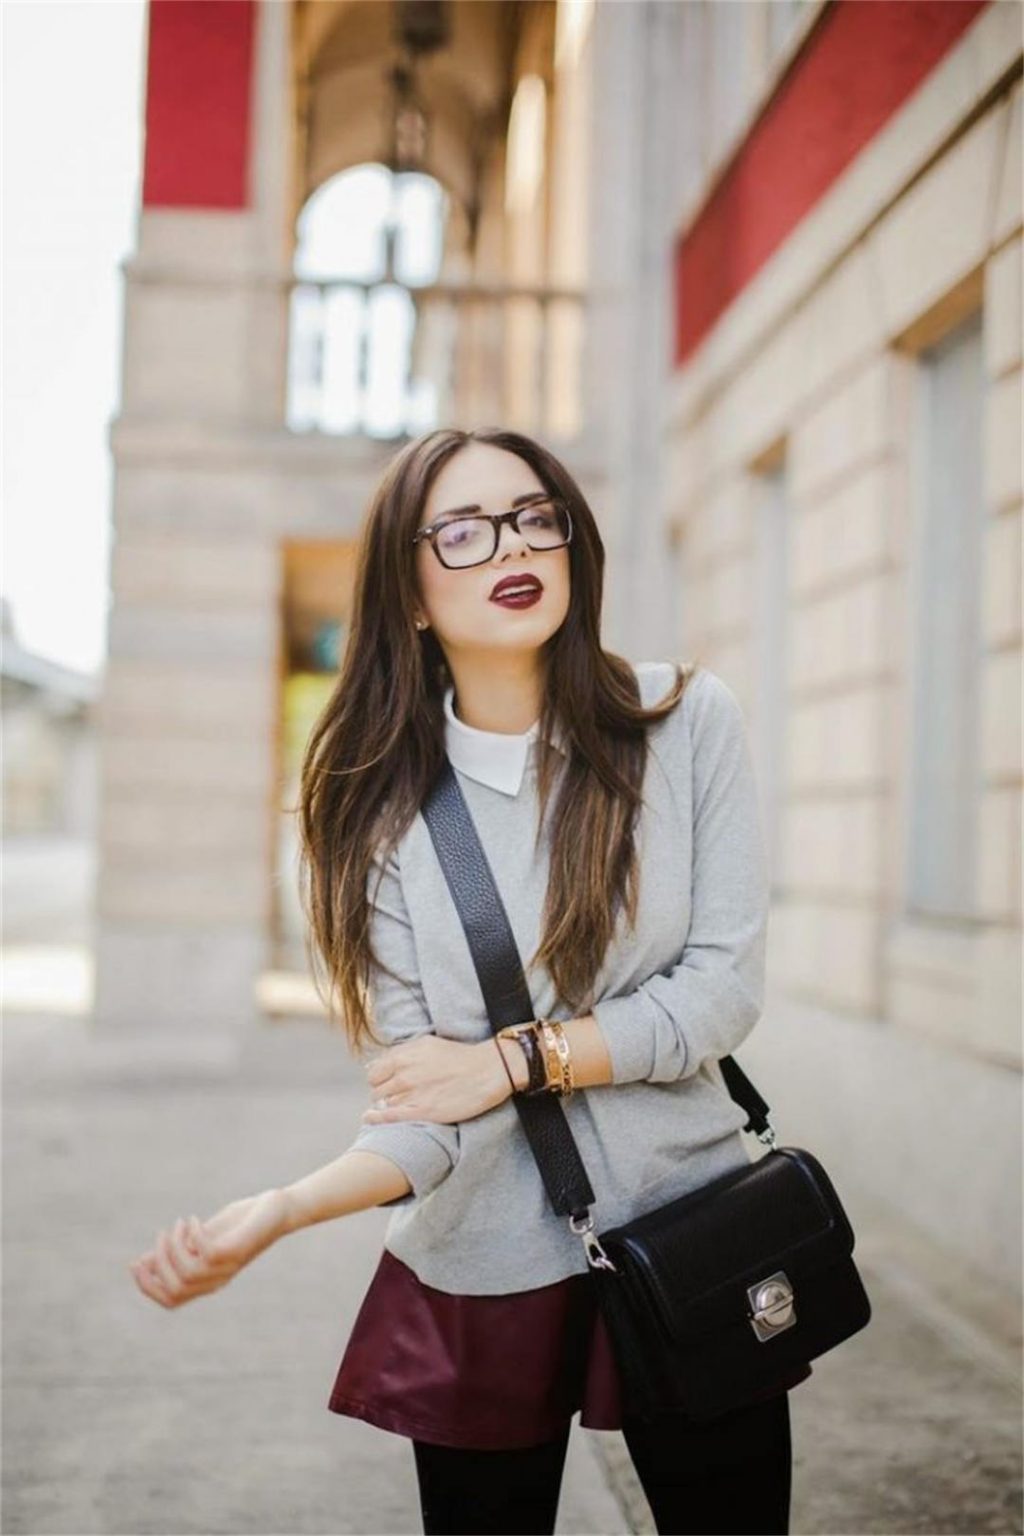 30+ Geek Chic Fashion Style Outfit Ideas for Women - Her Style Code